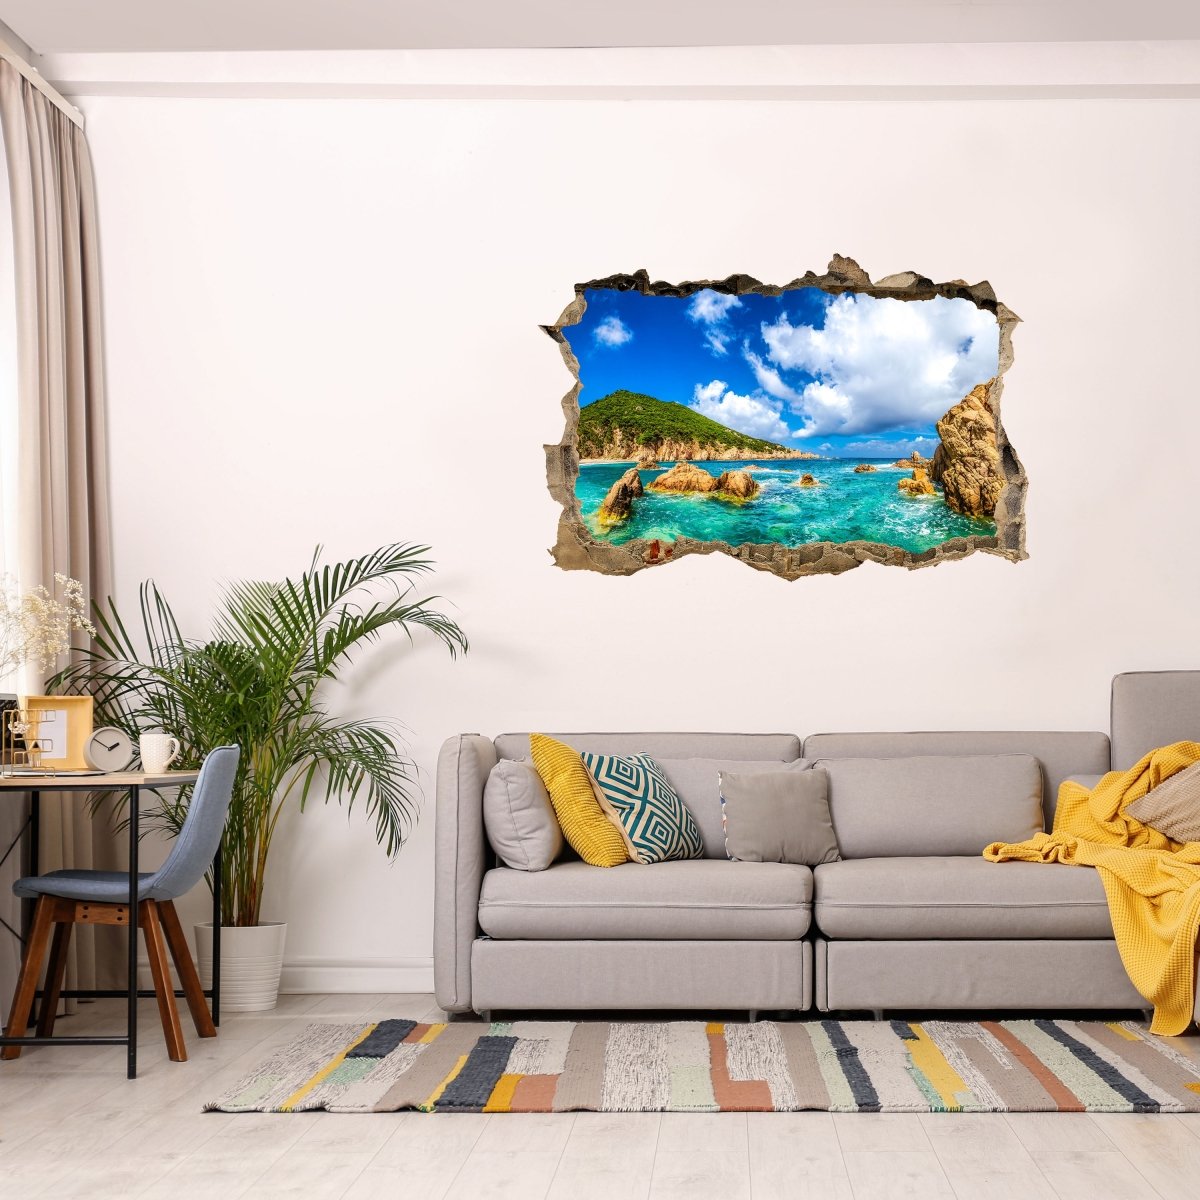 3D wall sticker lonely island, sea, clouds, rocks - Wall Decal M1147